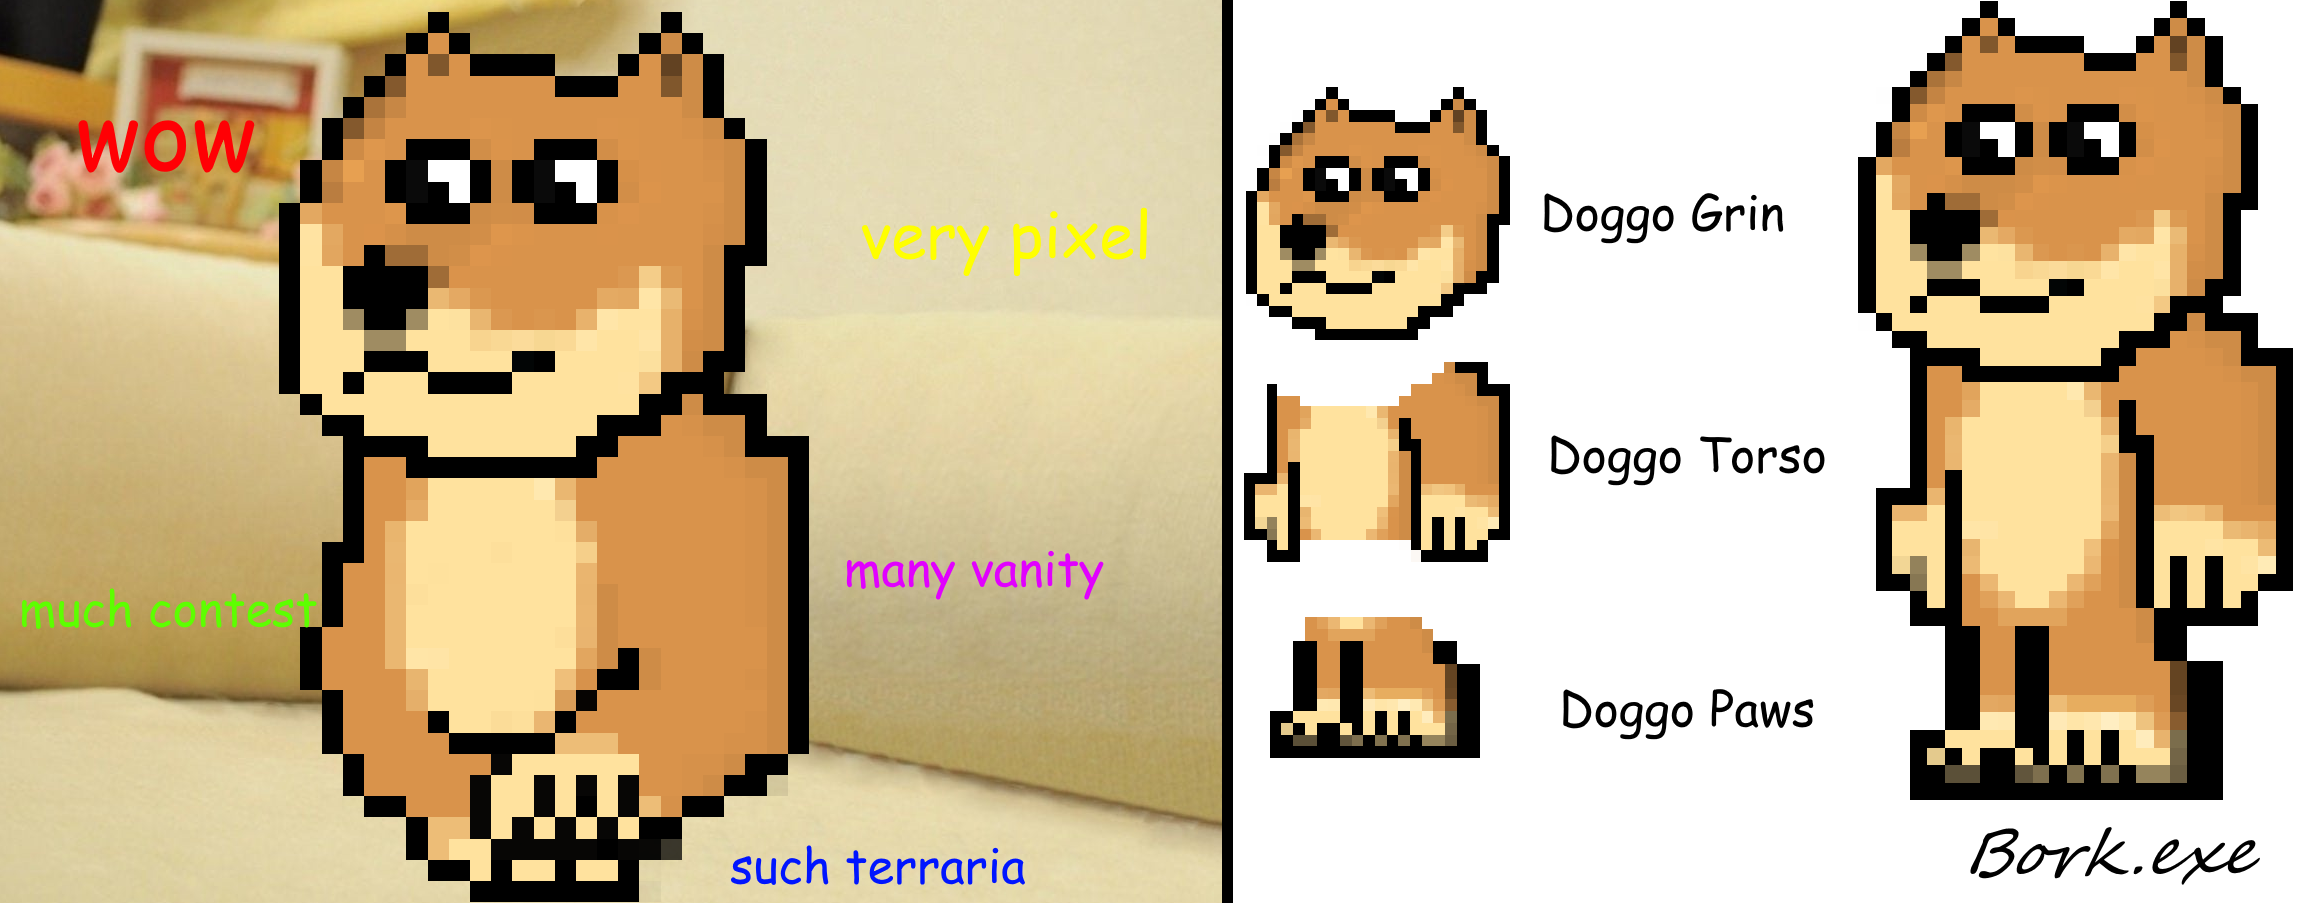 dogeSubmission.png